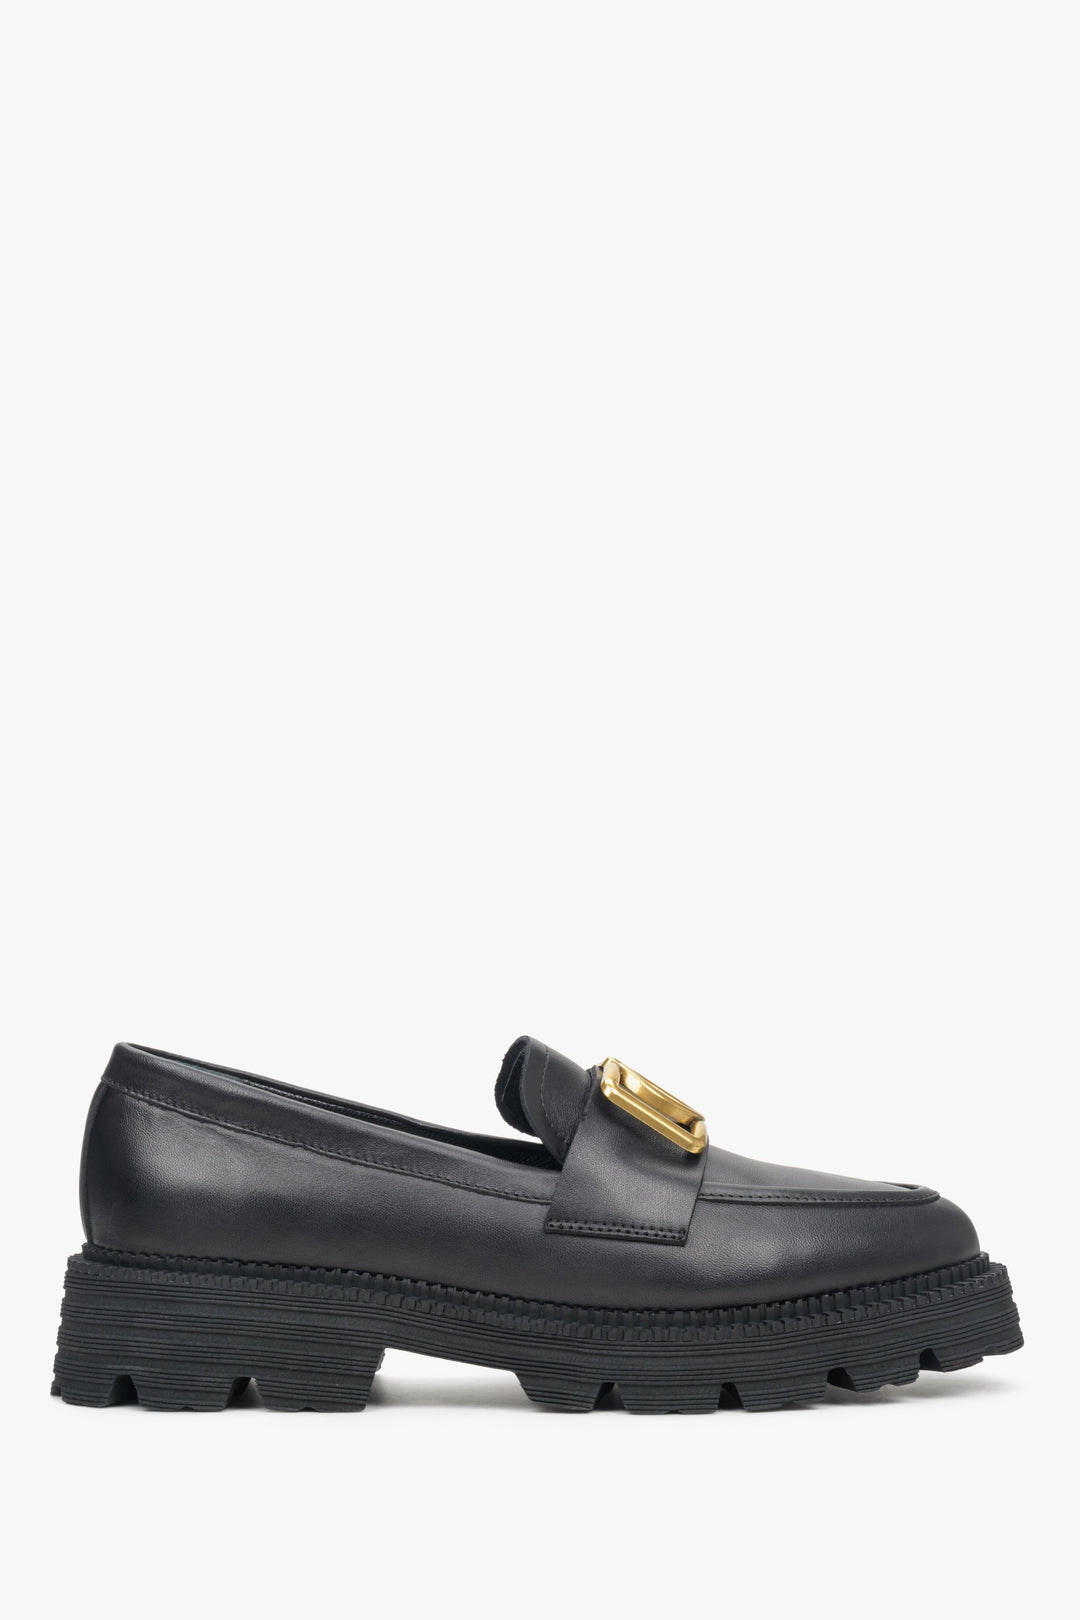 Black Women's Leather Loafers with Gold Chains Estro ER00113287